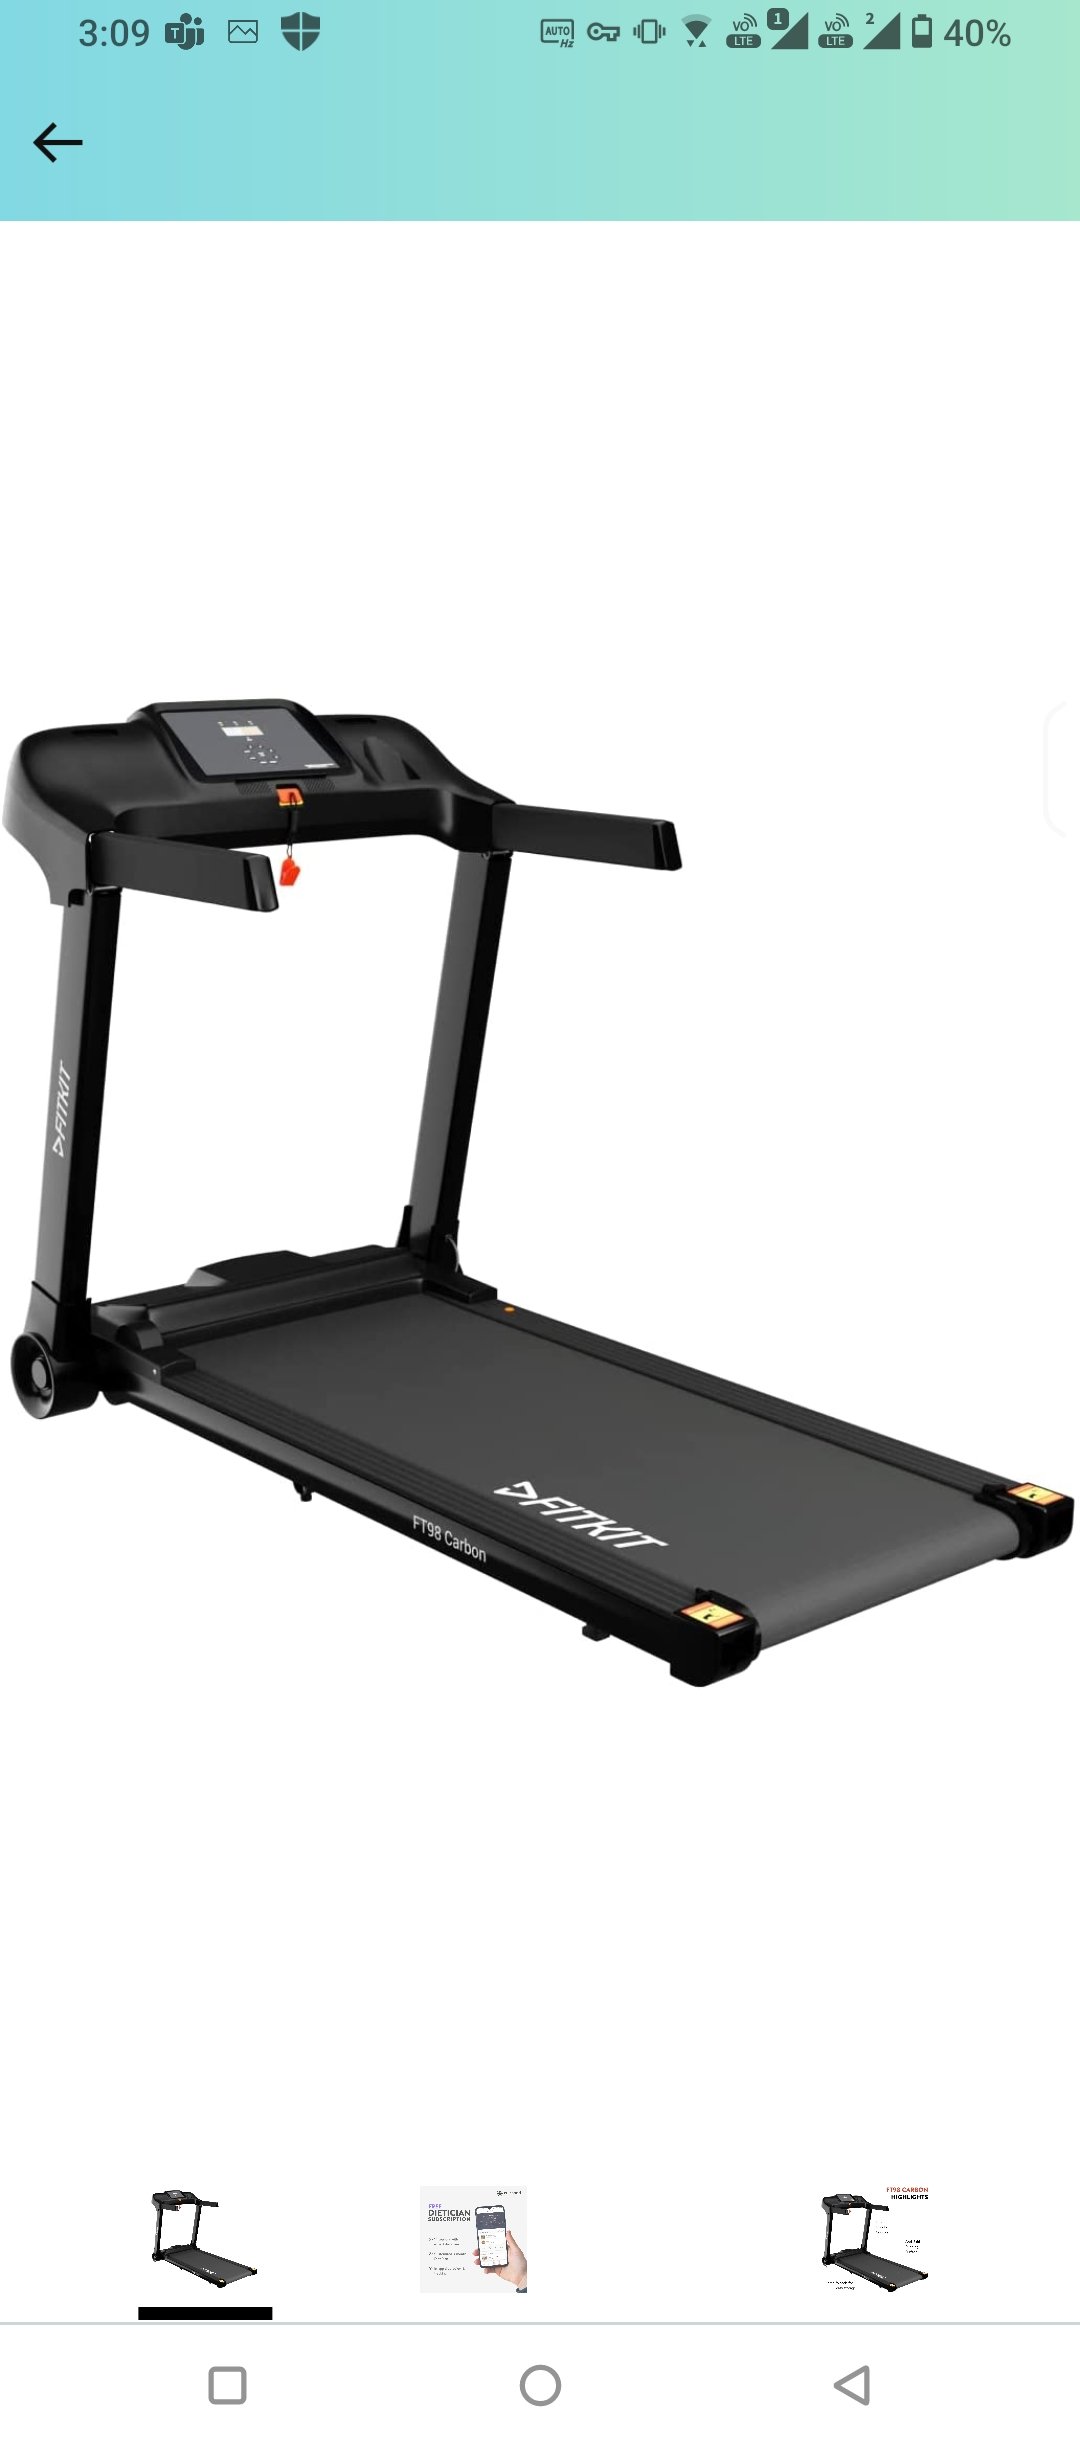 Brand New Treadmill with Good condition.